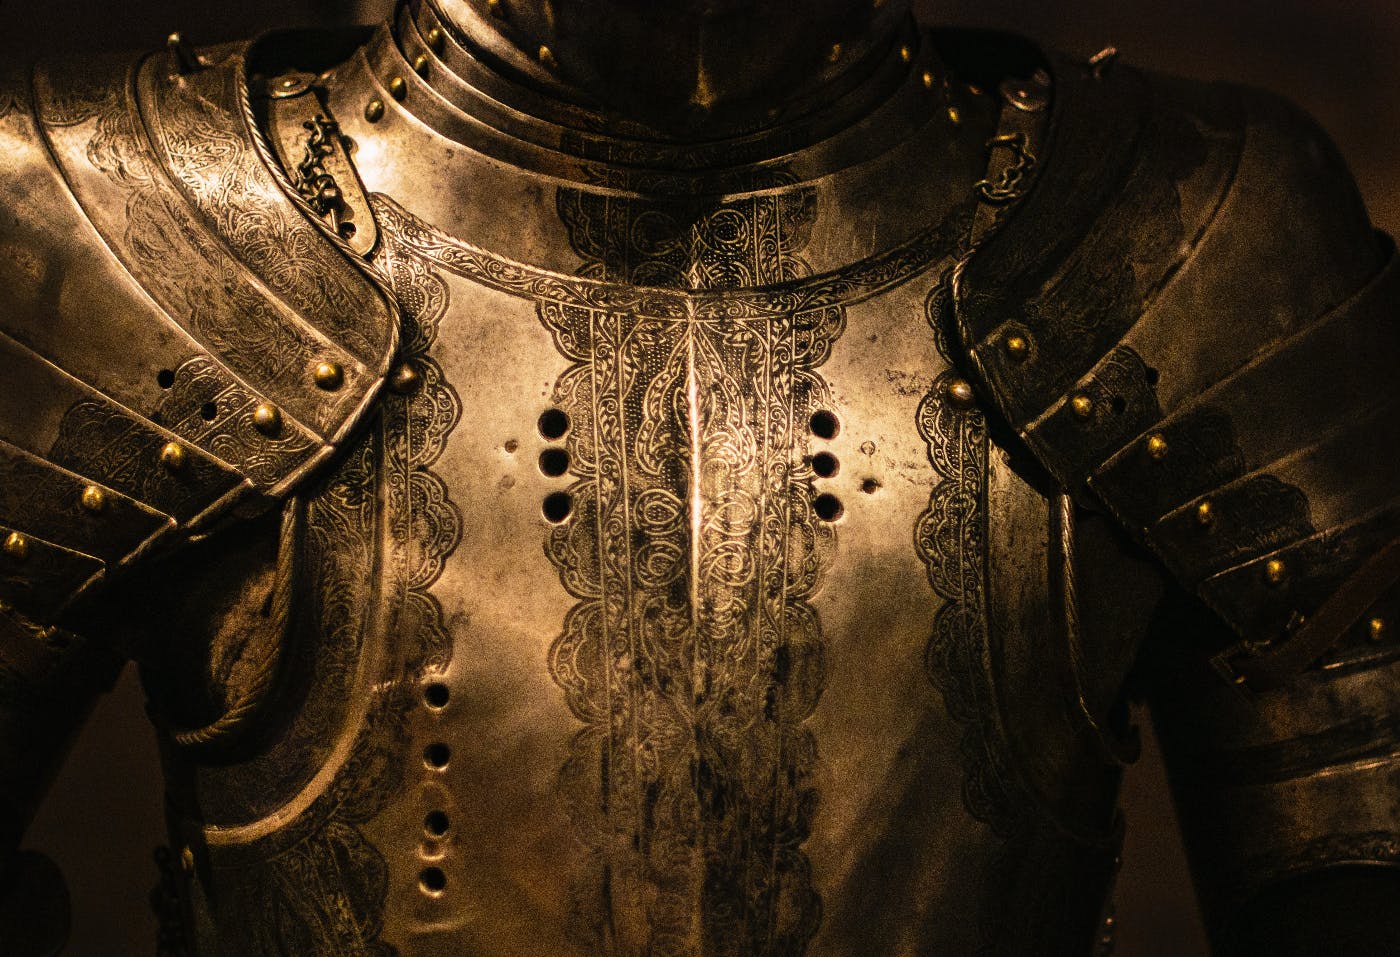 A close up on the chest and shouldders of a suit of armor.